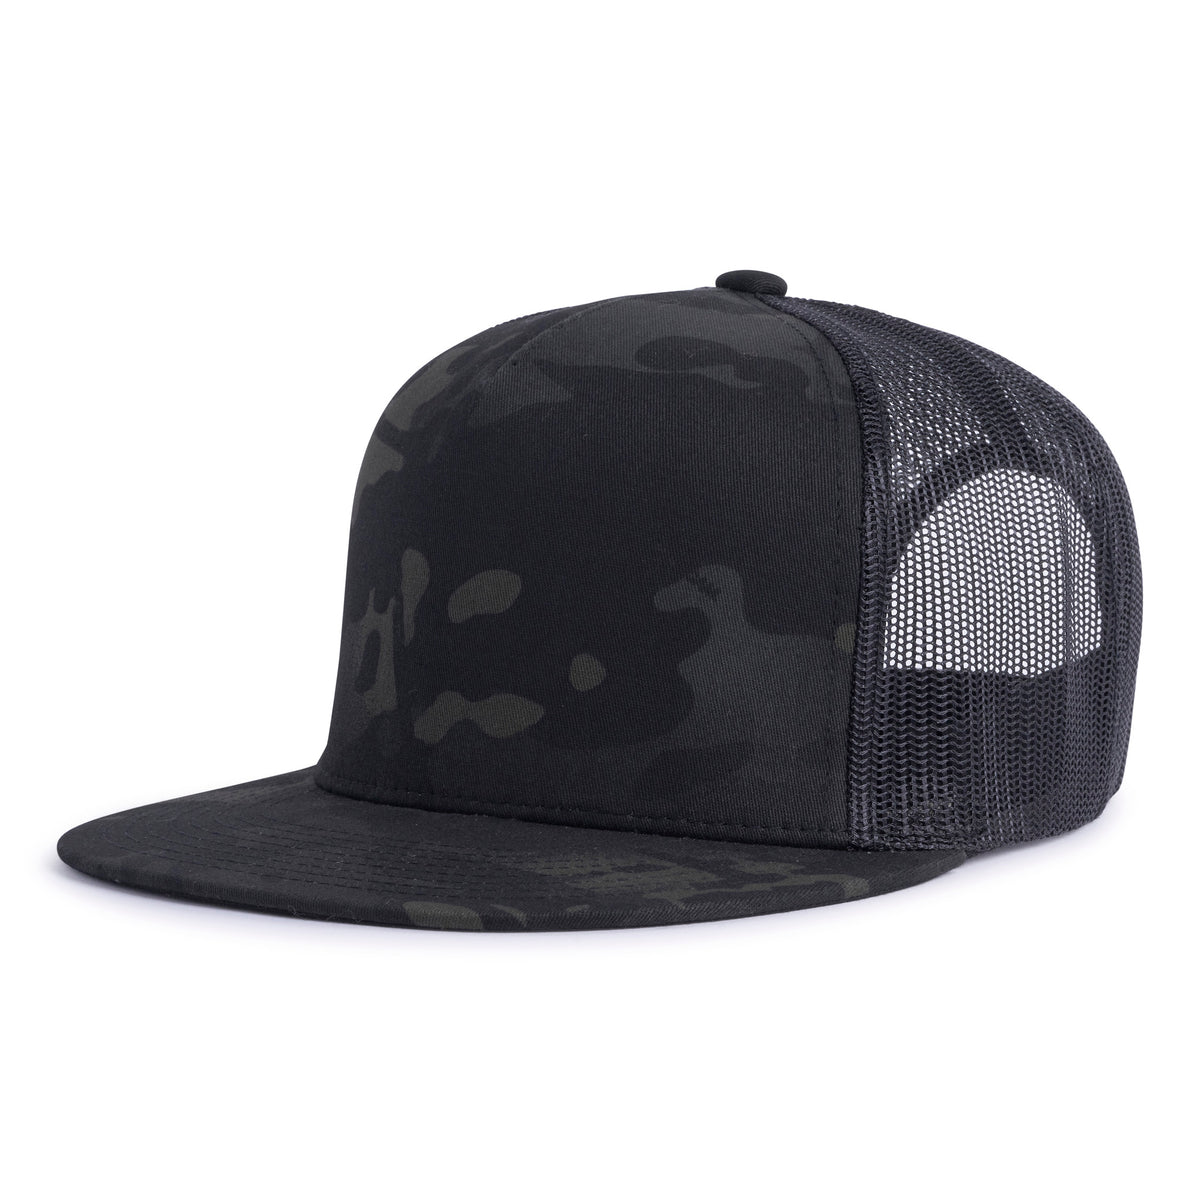 Black and dark grey camo trucker hat with a flat bill, 5-panels, structured high crown, black mesh back, and a snapback closure from Tailgate Hats.